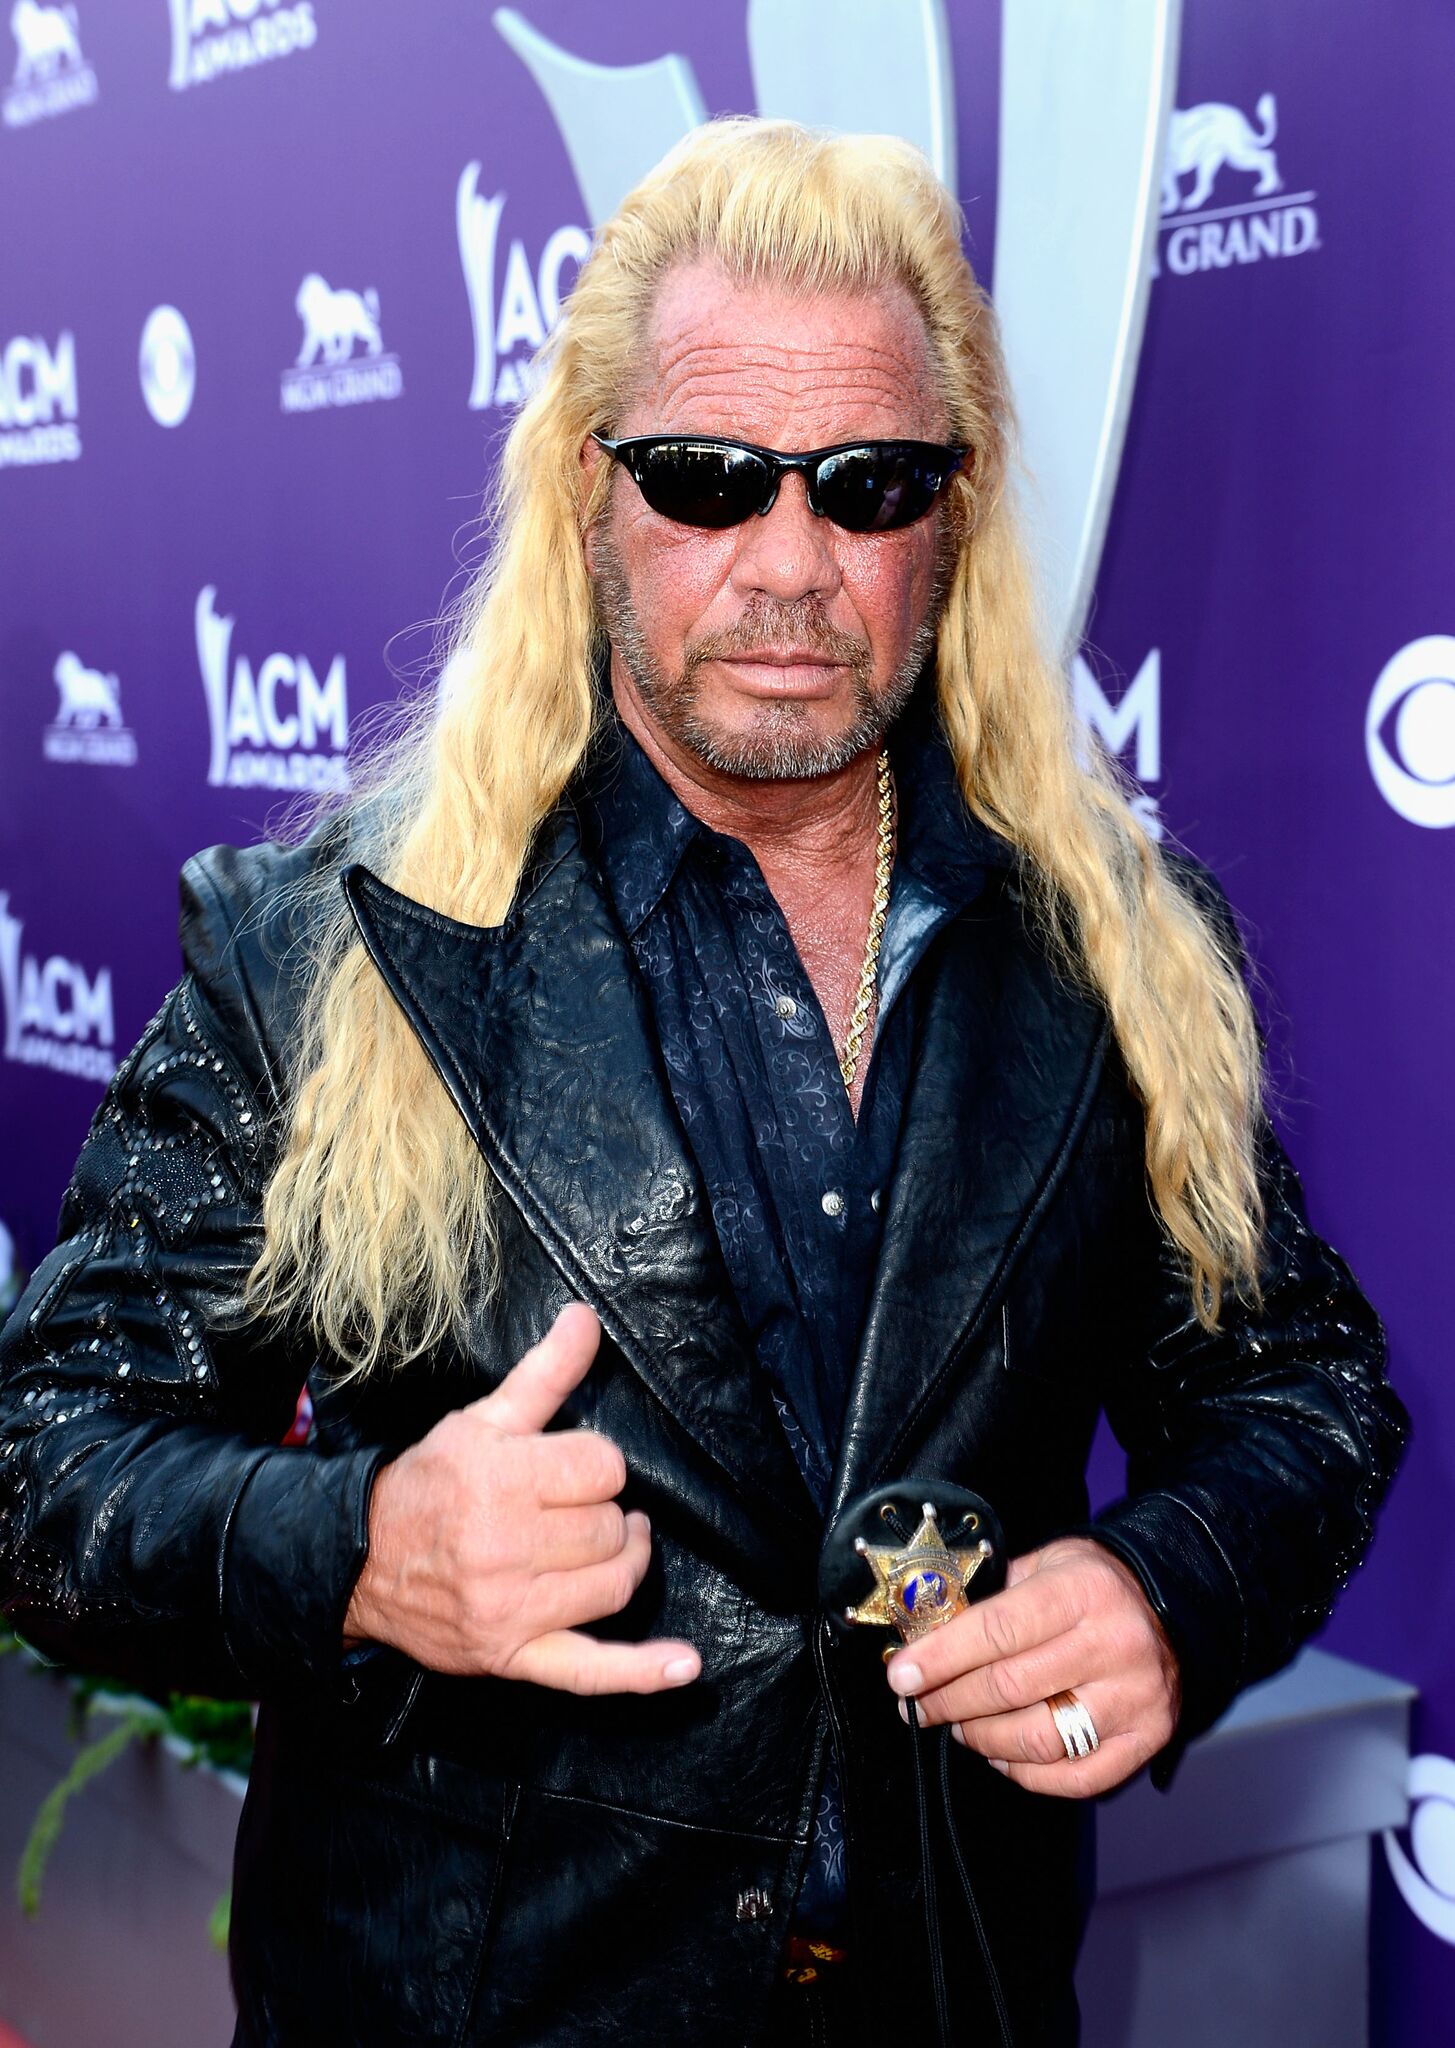  TV personality Dog the Bounty Hunter arrives at the 48th Annual Academy of Country Music Awards at the MGM Grand Garden Arena | Getty Images 